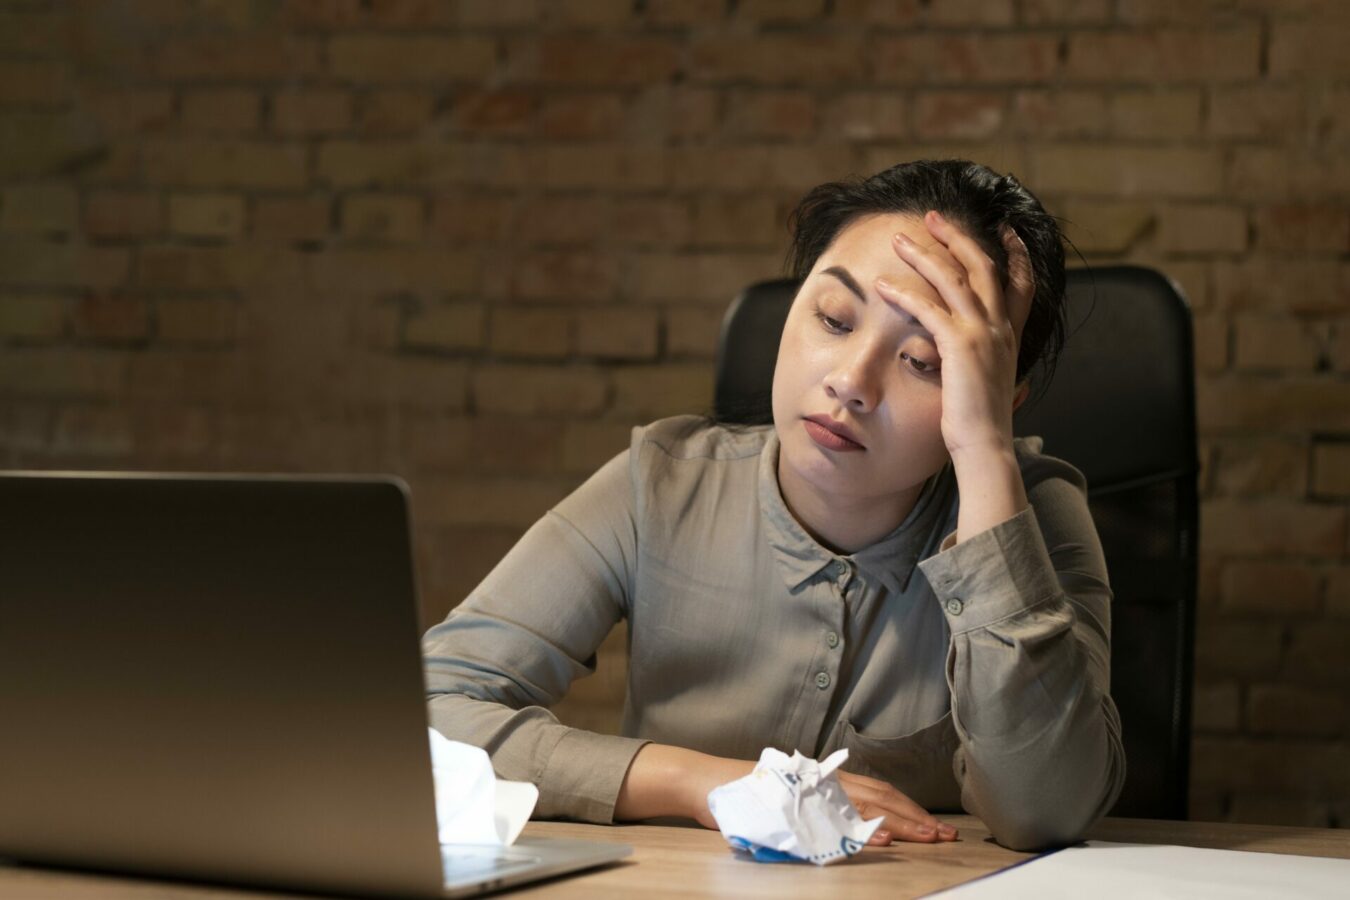 7 Tips for Managing Stress Related to Work